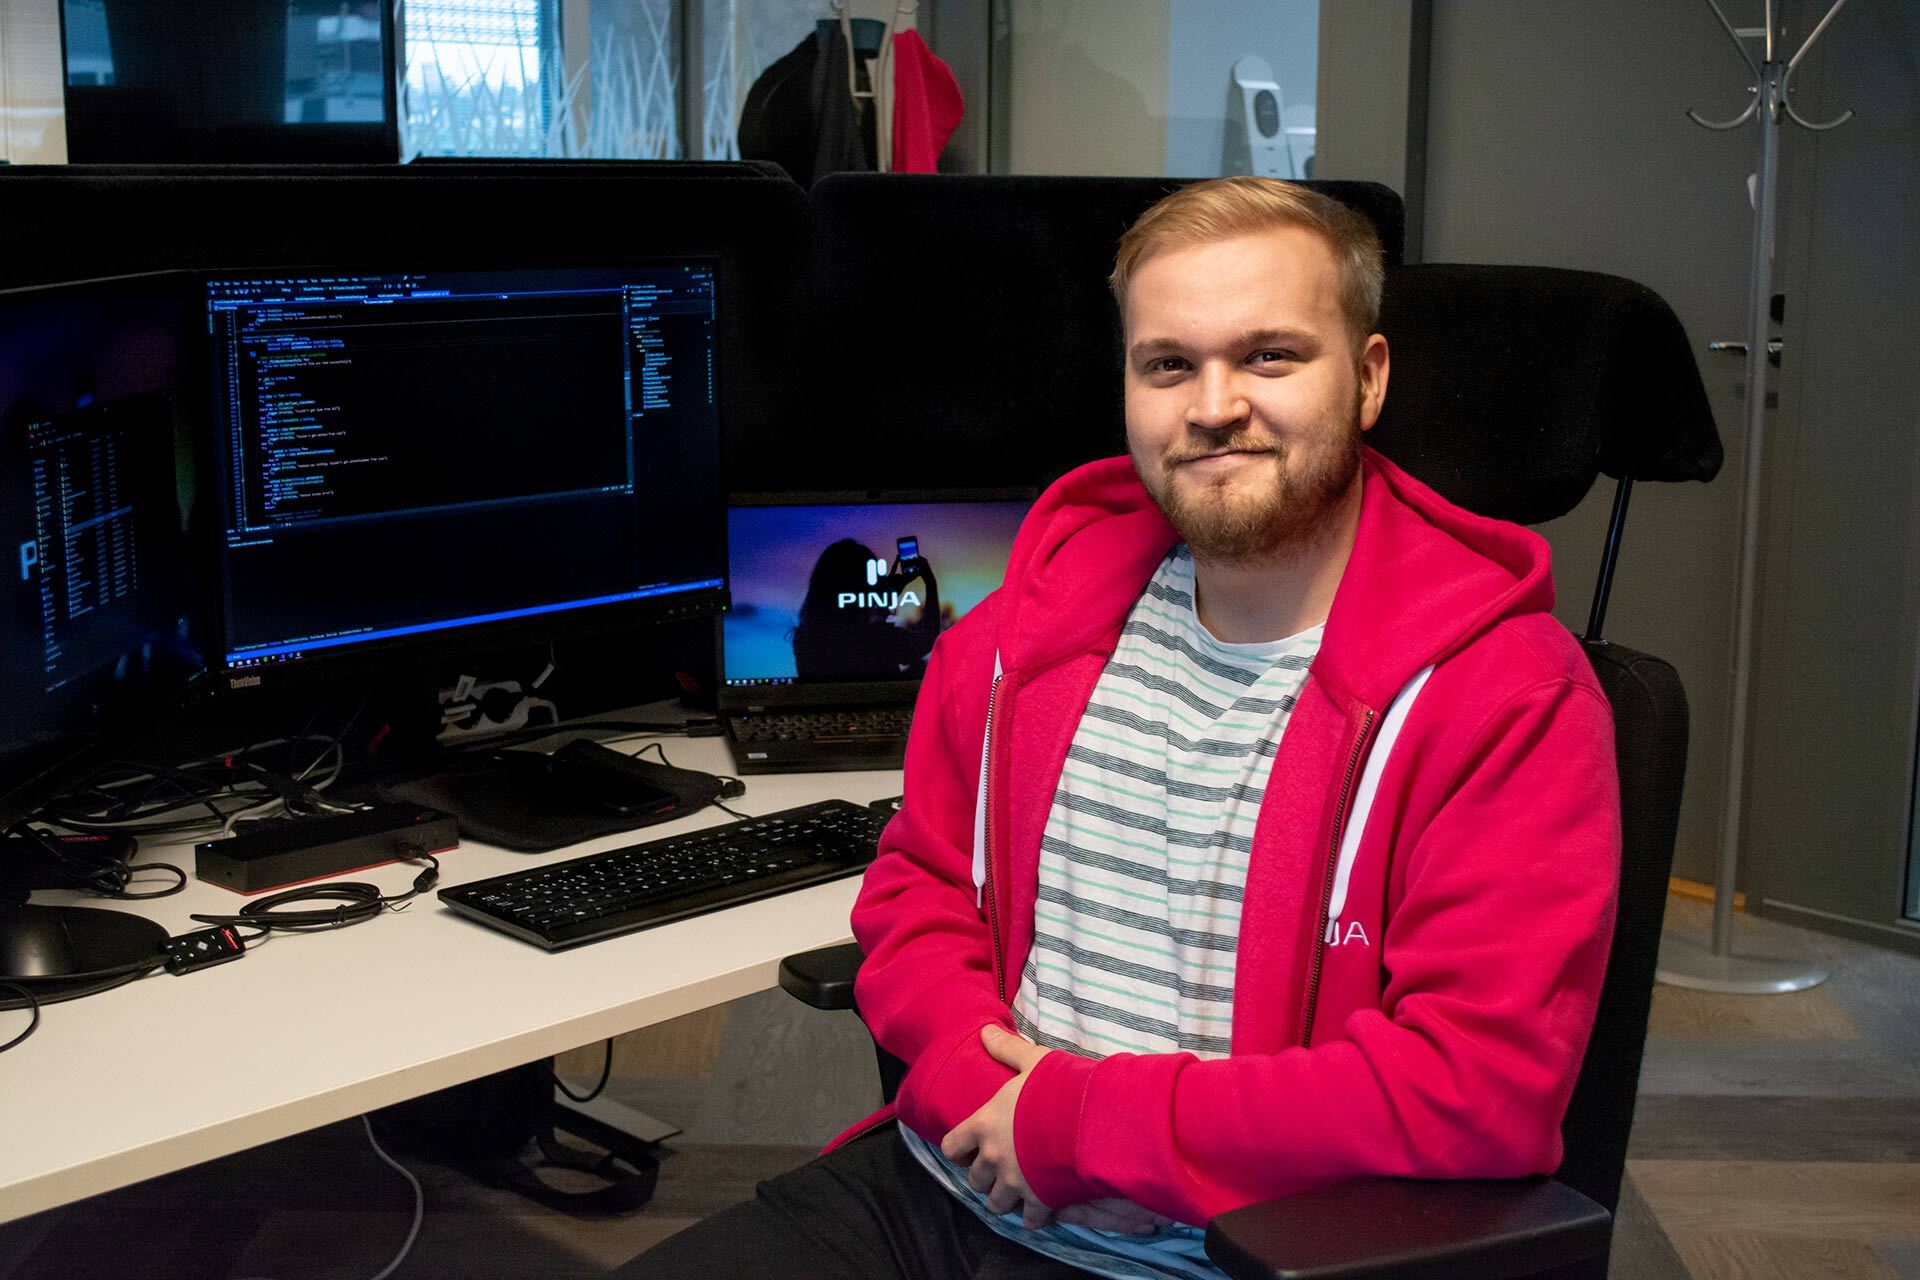 Hannu Kujanpää who completed his practical training at Pinja sitting in front of two computer screens